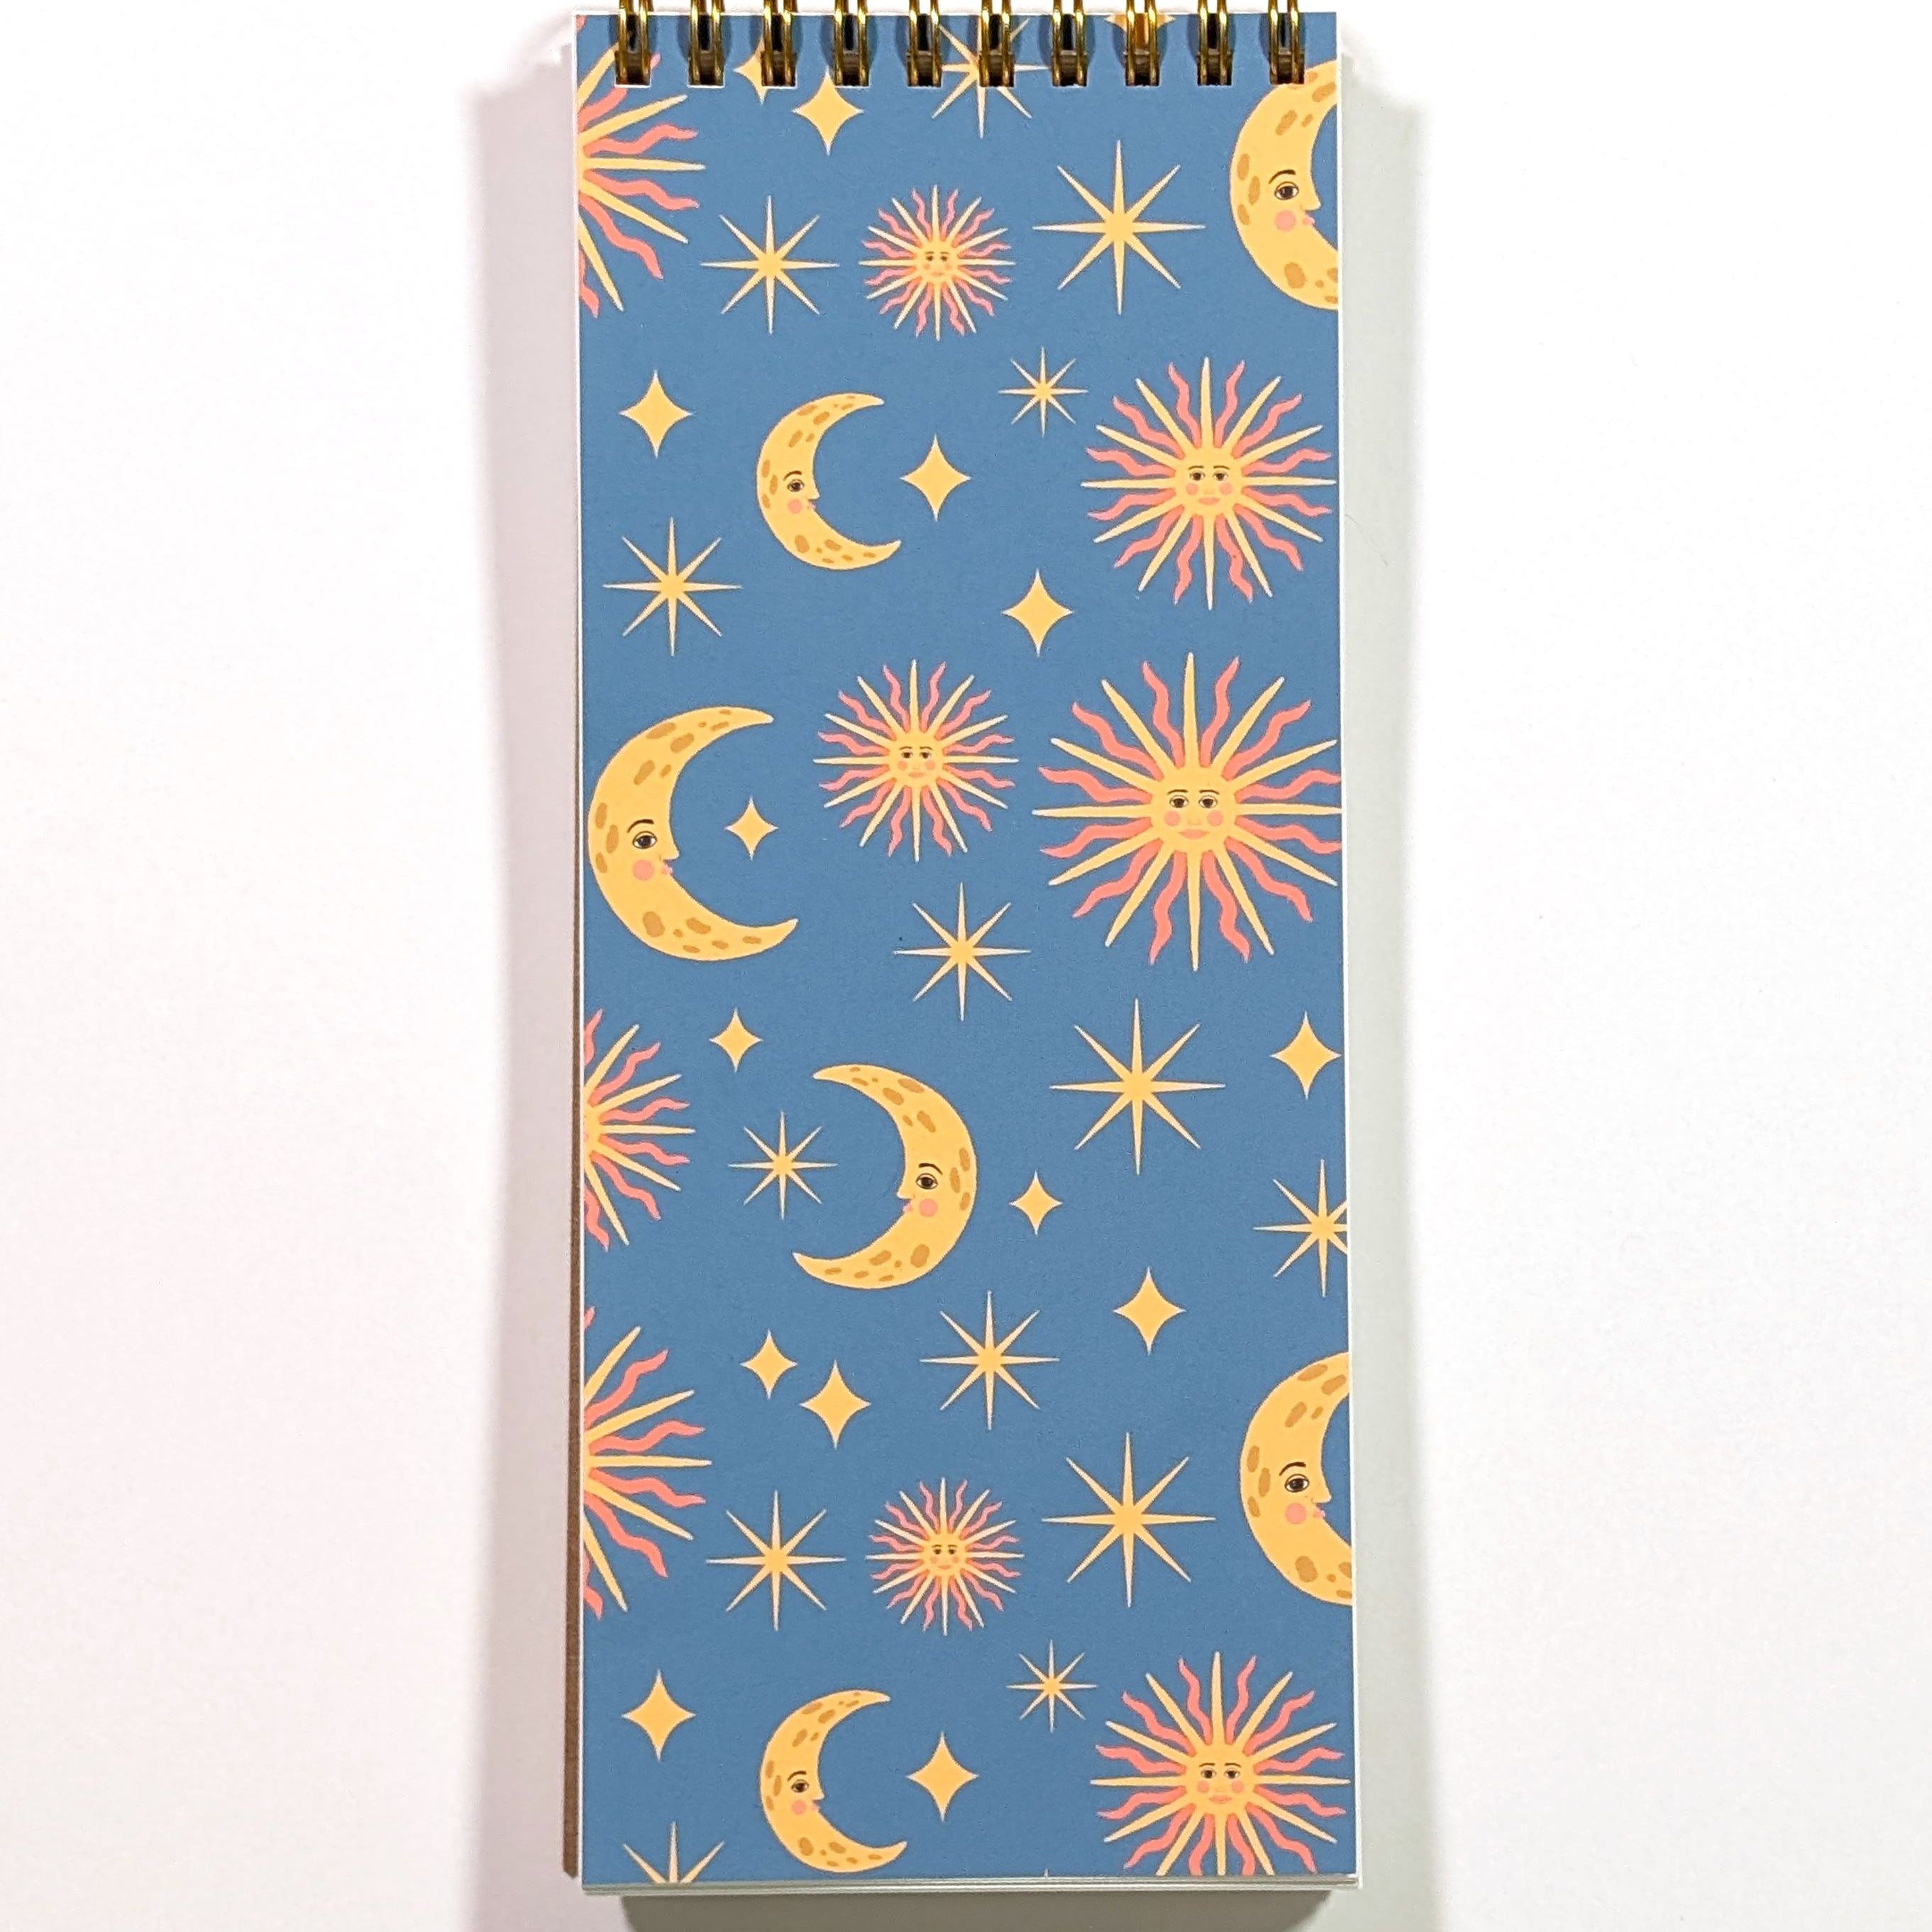 Sun and Moon Top Spiral To-Do List Notebook Notebooks Lucid Moon Studio 